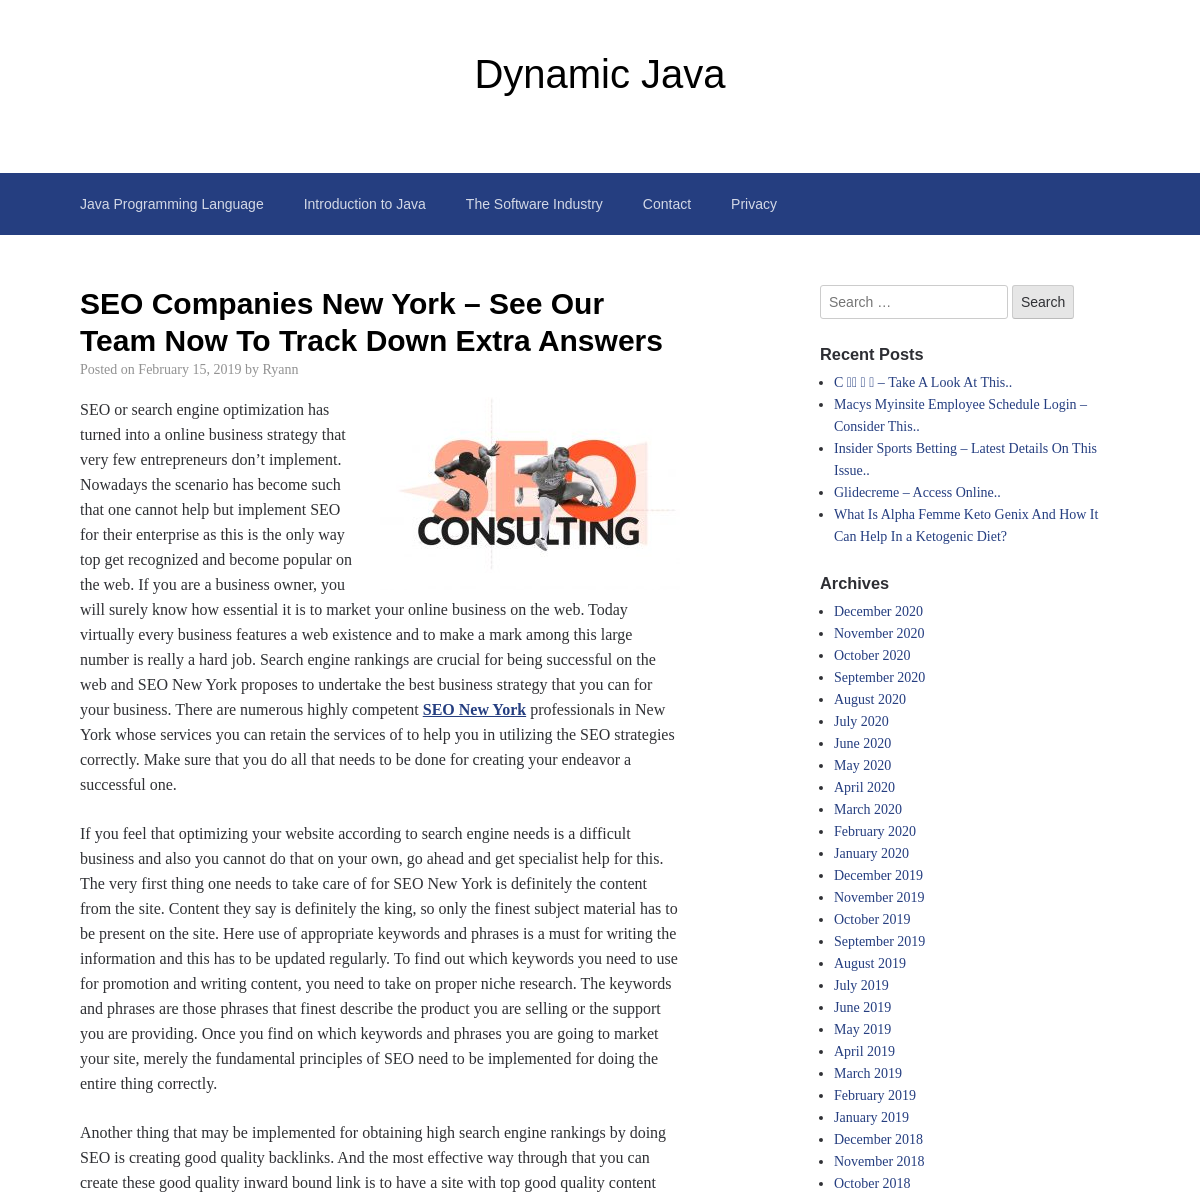 A complete backup of dynamicjava.org